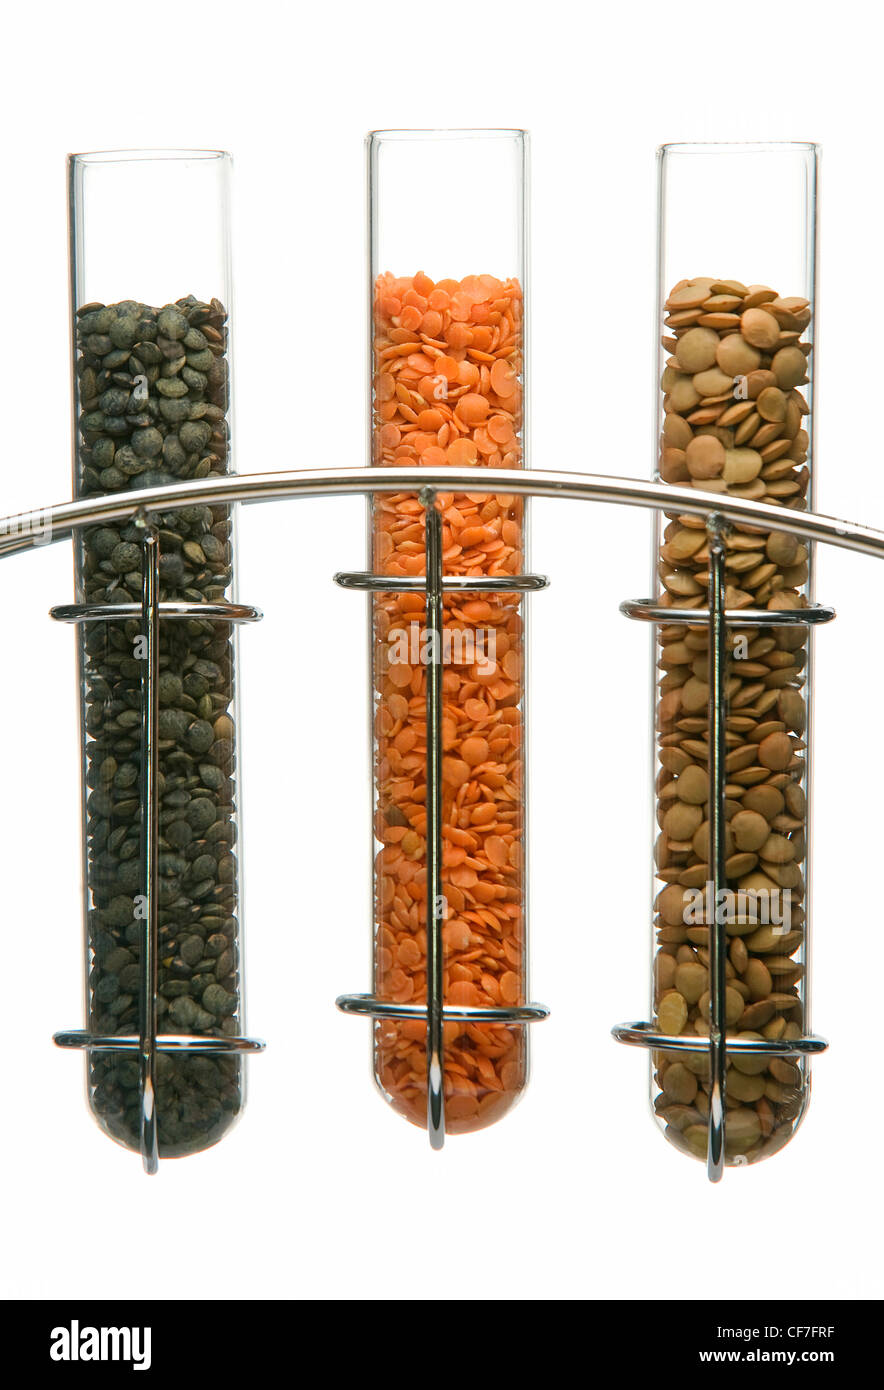 Puy lentils, split red lentils, and brown lentils in glass test tubes in a chrome stand Stock Photo